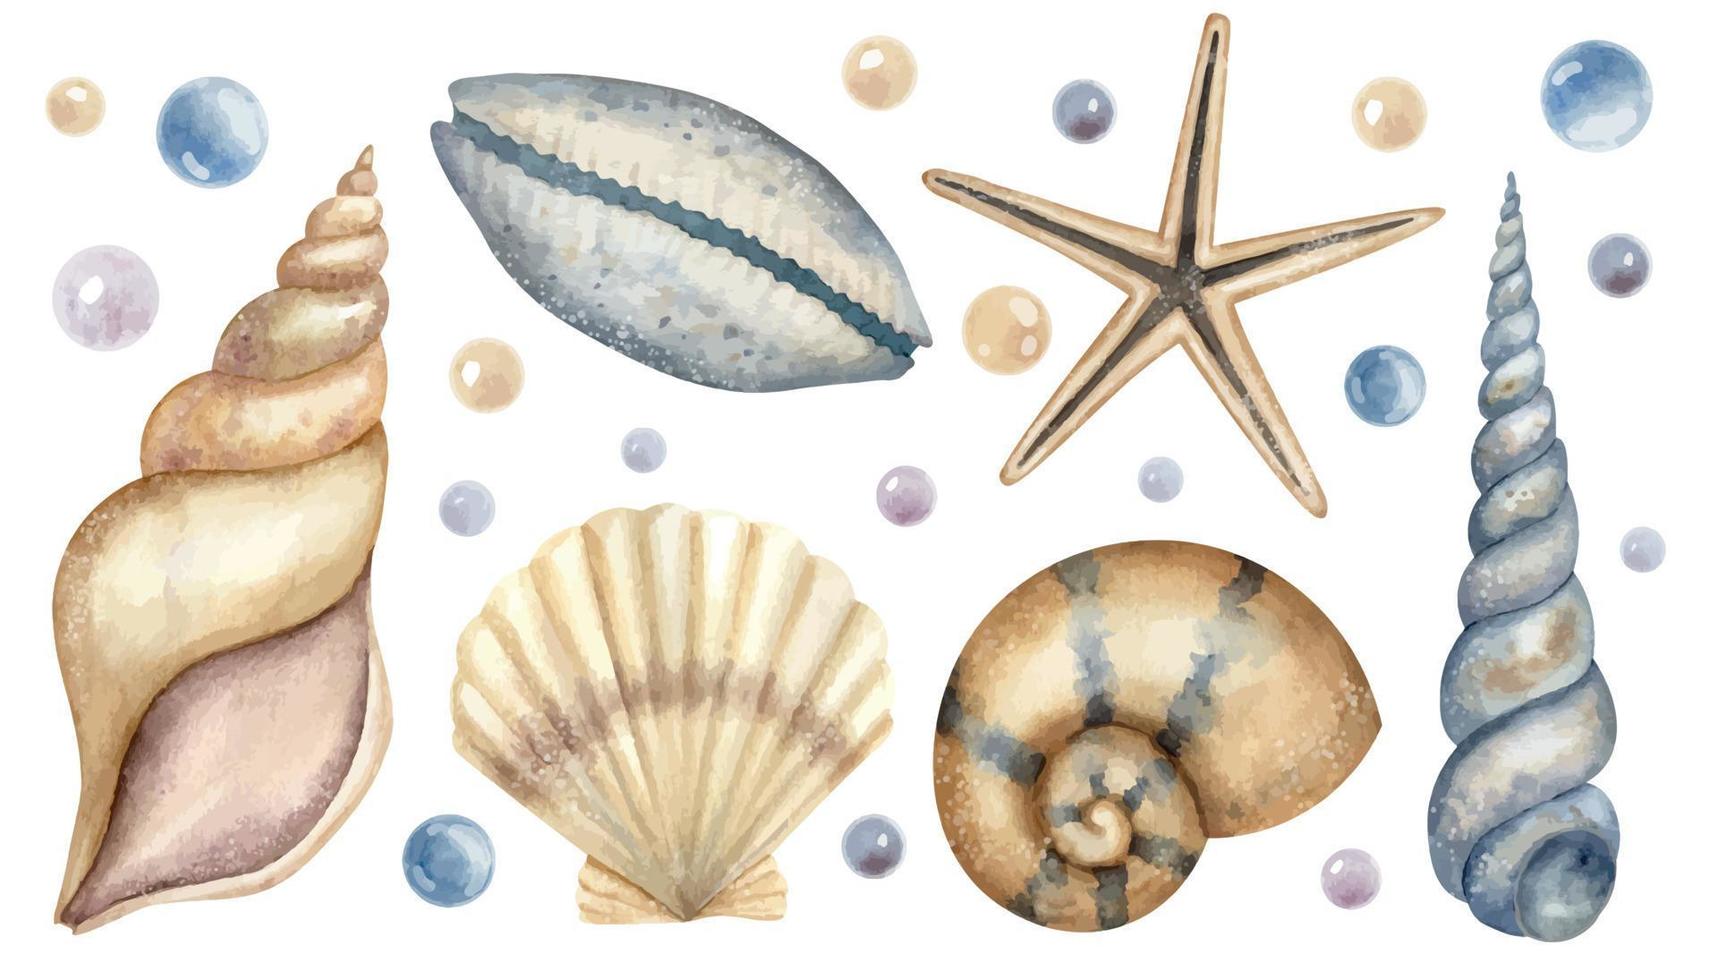 Set of Seashells. Big hand drawn Bundle of Sea Shells on isolated background. Collection of Cockleshells and starfish. Drawing of underwater life. Elements for design in marine style vector